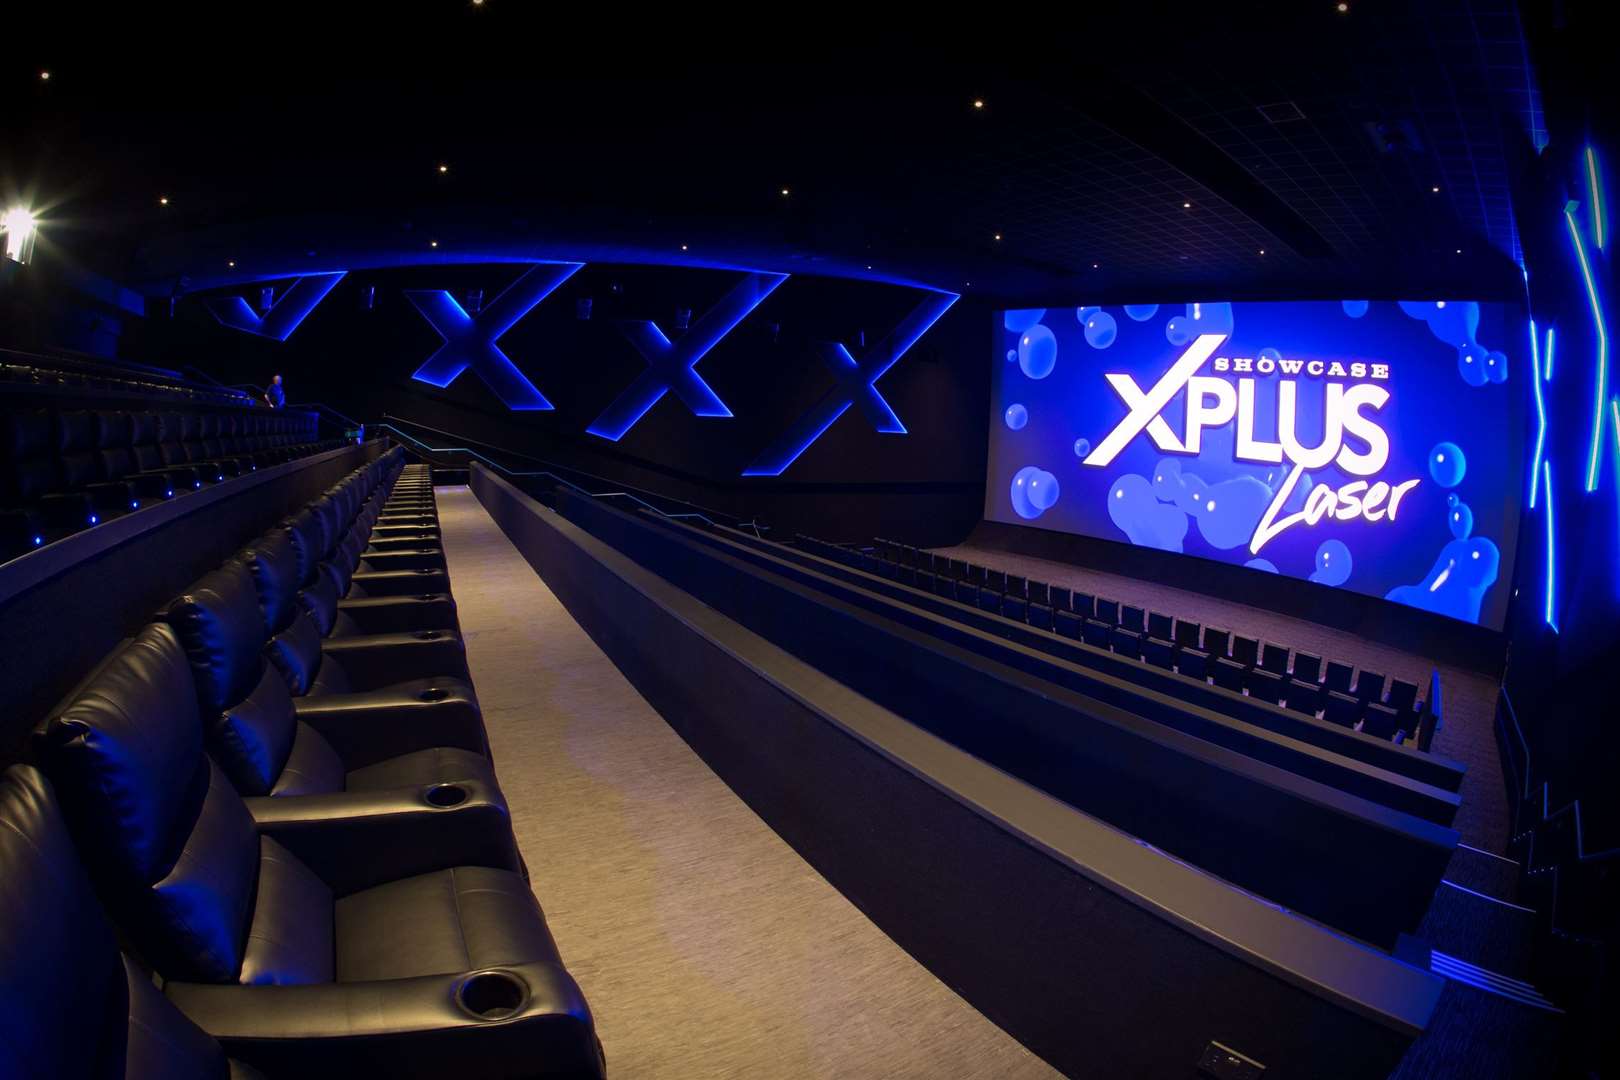 The cinema expanded in 2018, with four new screens